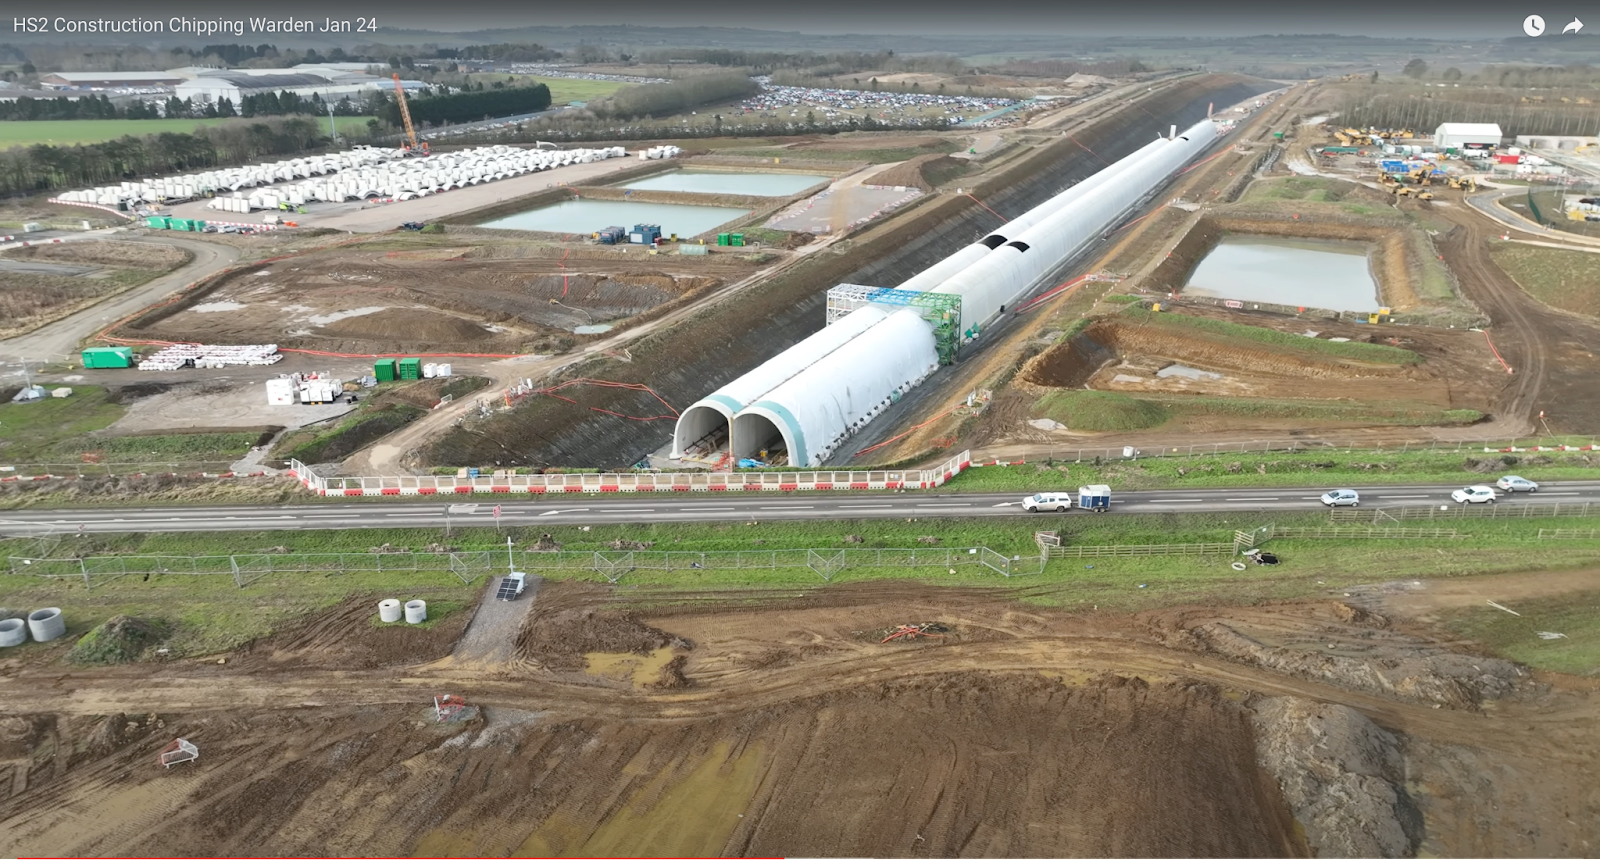 Cut and cover tunnel for HS2 in England under construction, 2024 